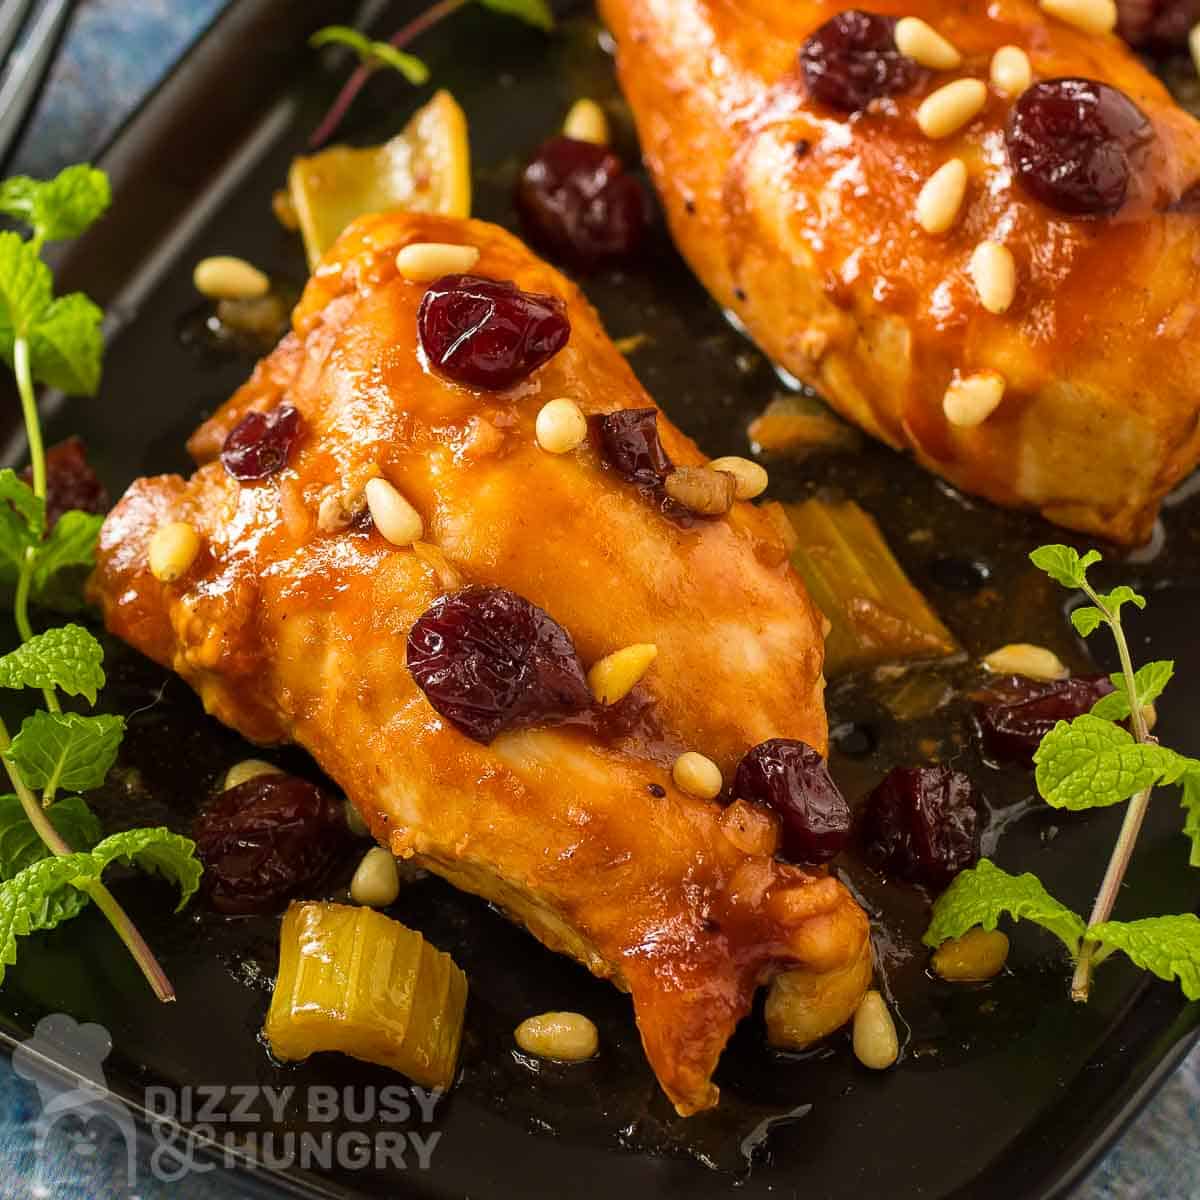 Overhead close up shot of two pieces of cranberry chicken garnished with cranberries and herbs on a black plate.